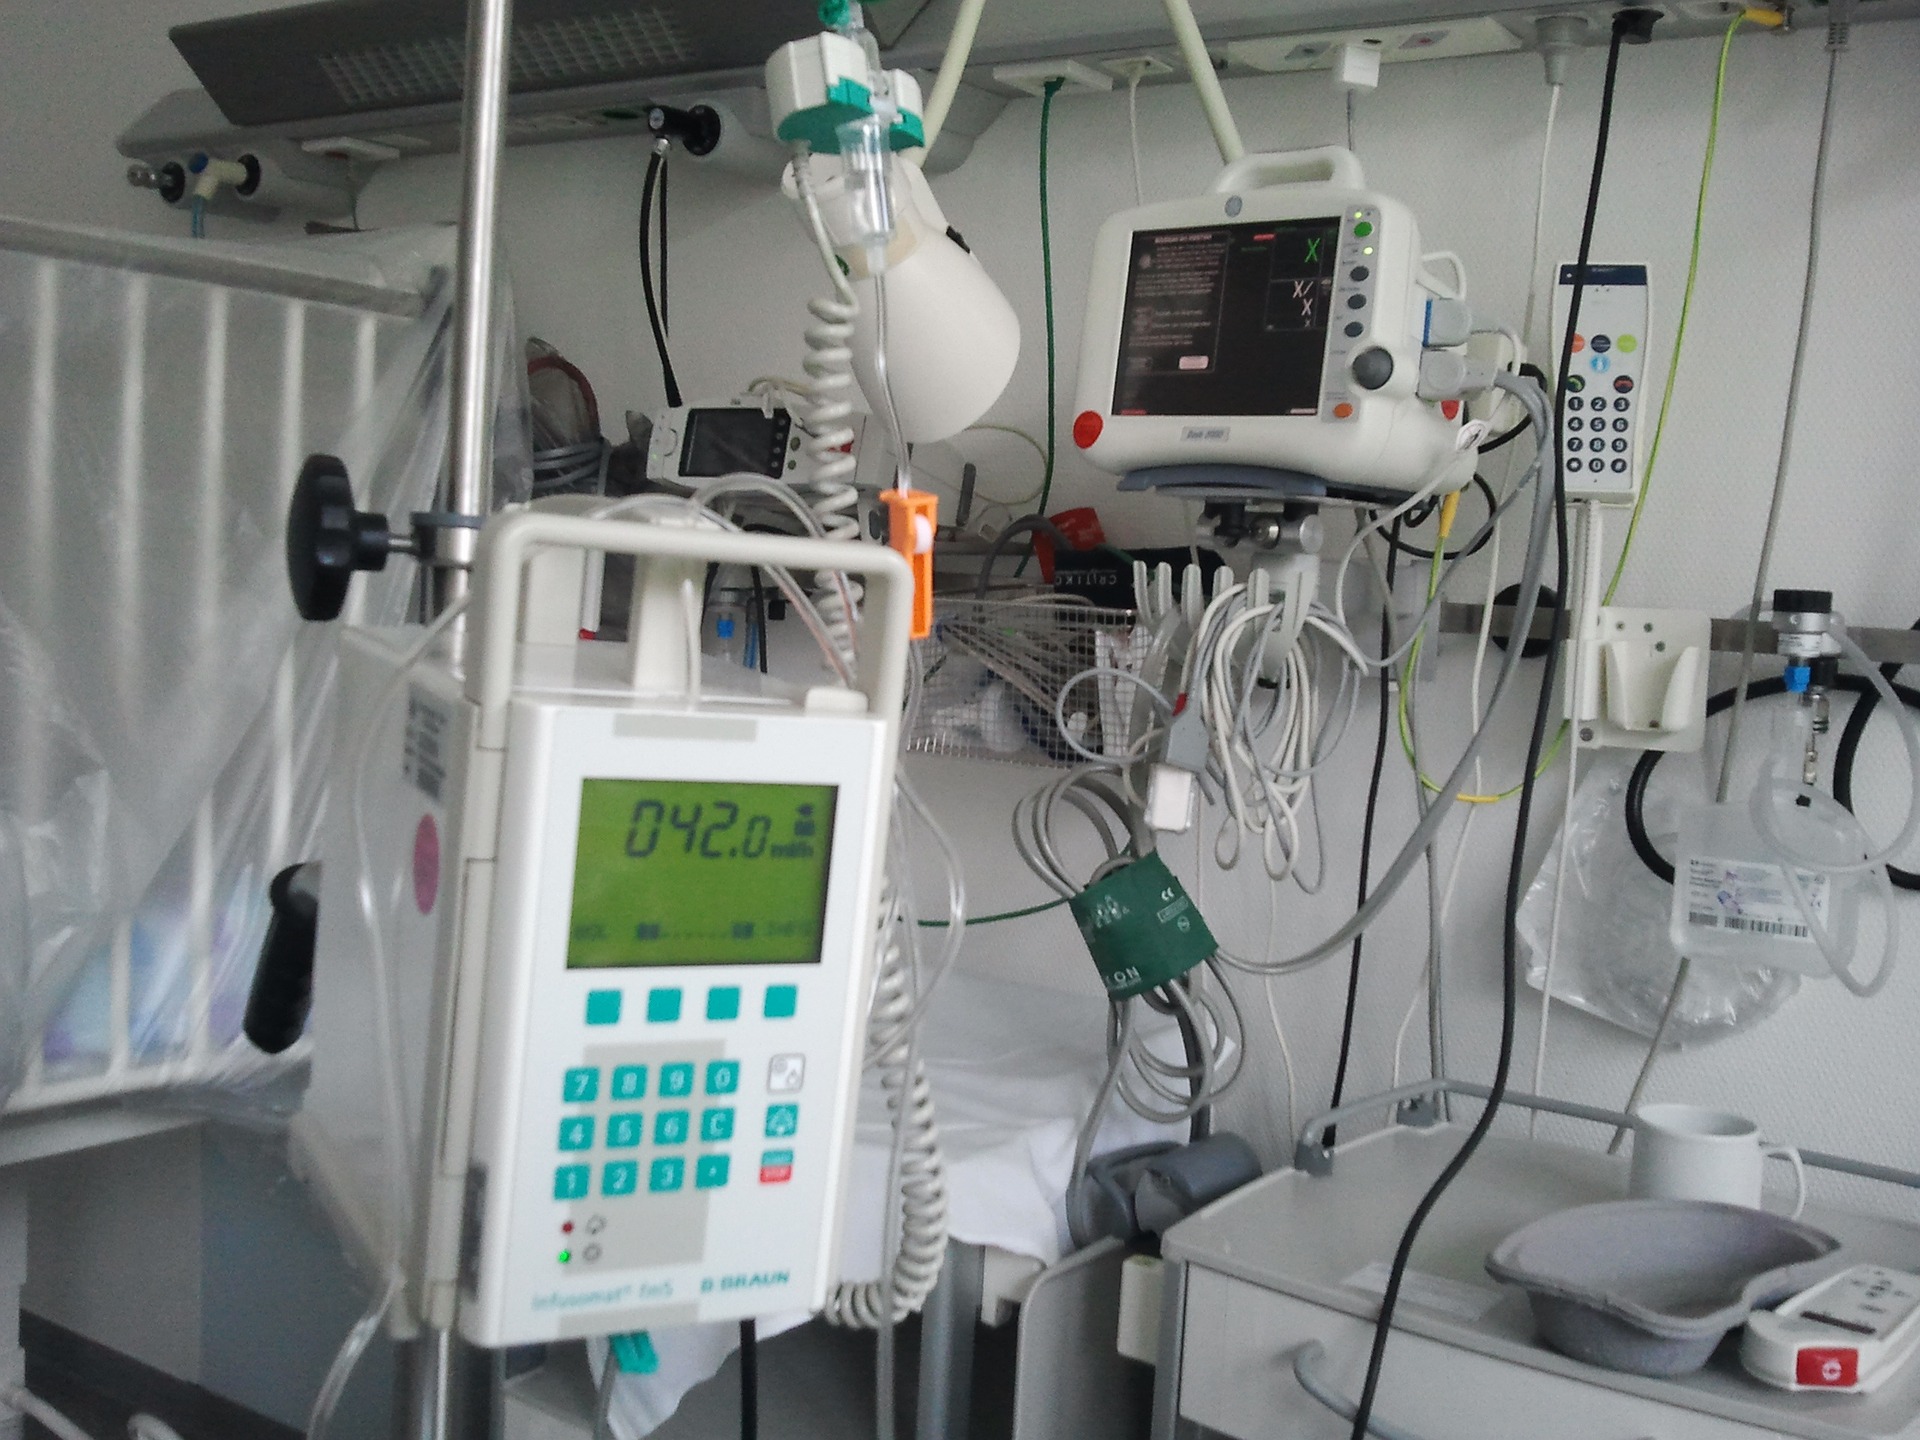 Hospital equipment is especially designed to reduce risk in medical devices